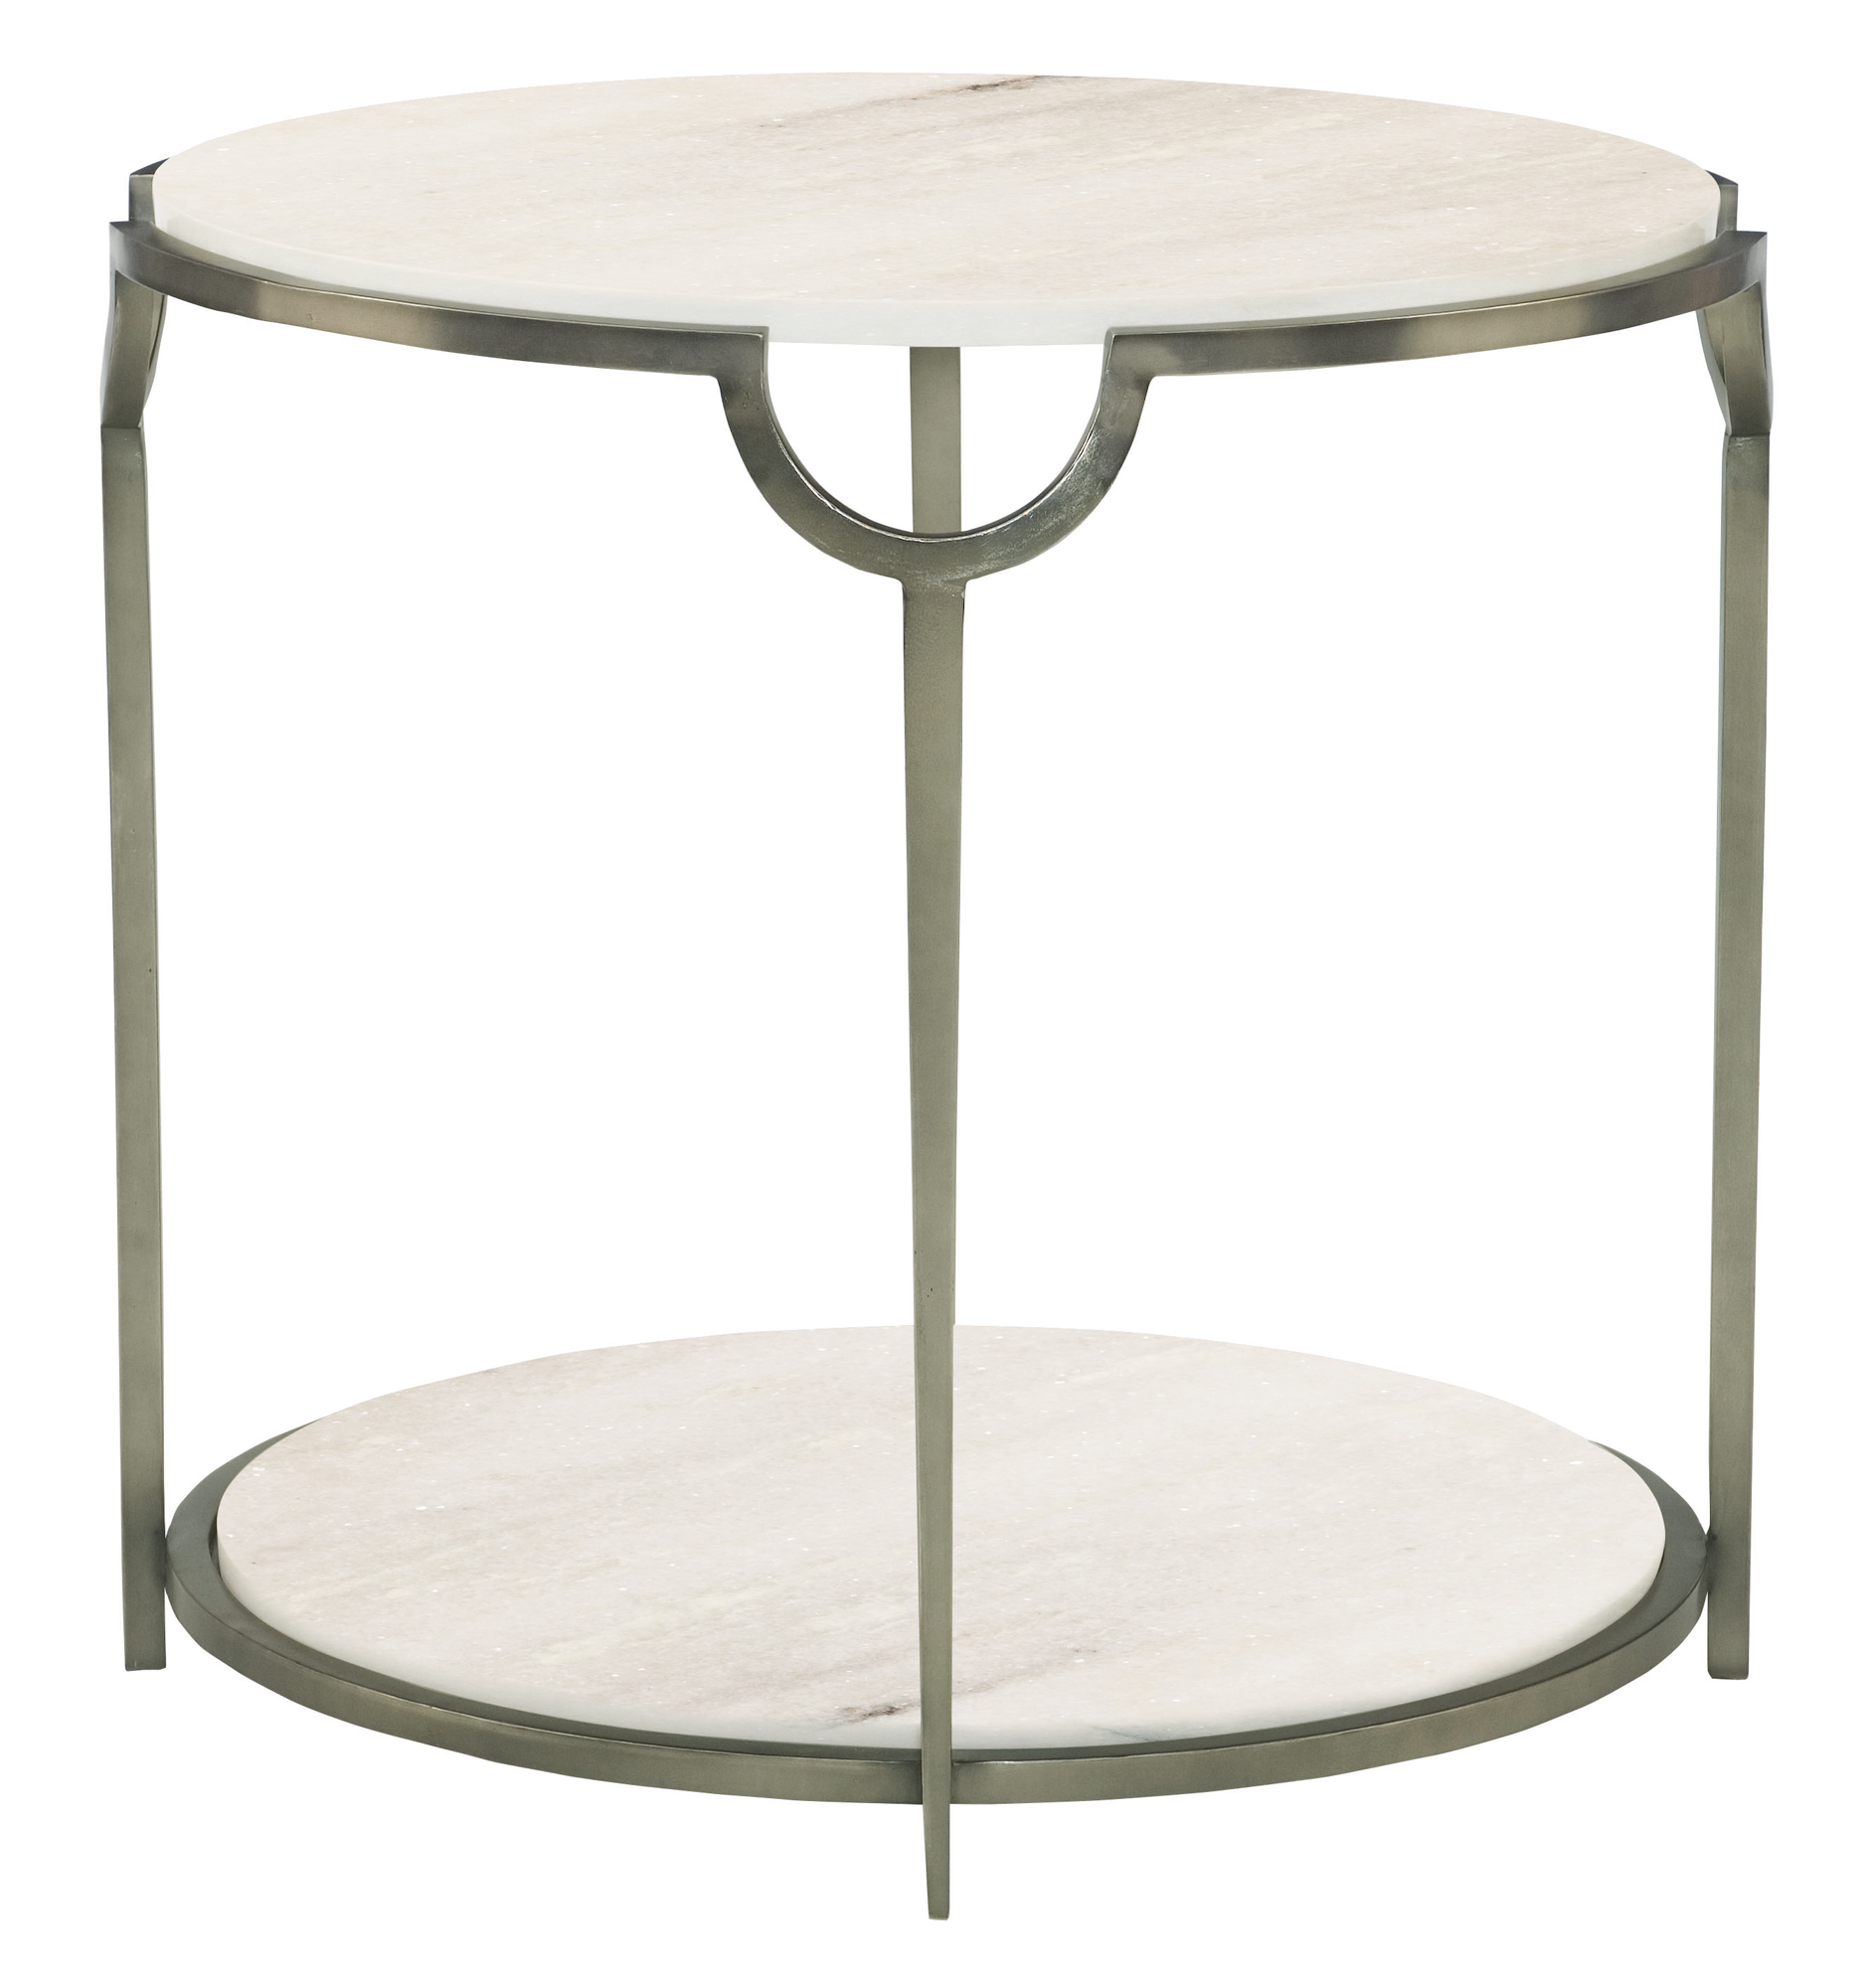 magnificent round marble top accent table silver tables color big tablecloth wood mirrored decor gold small decorating outdoor metal end paint lots killian ideas target pedestal